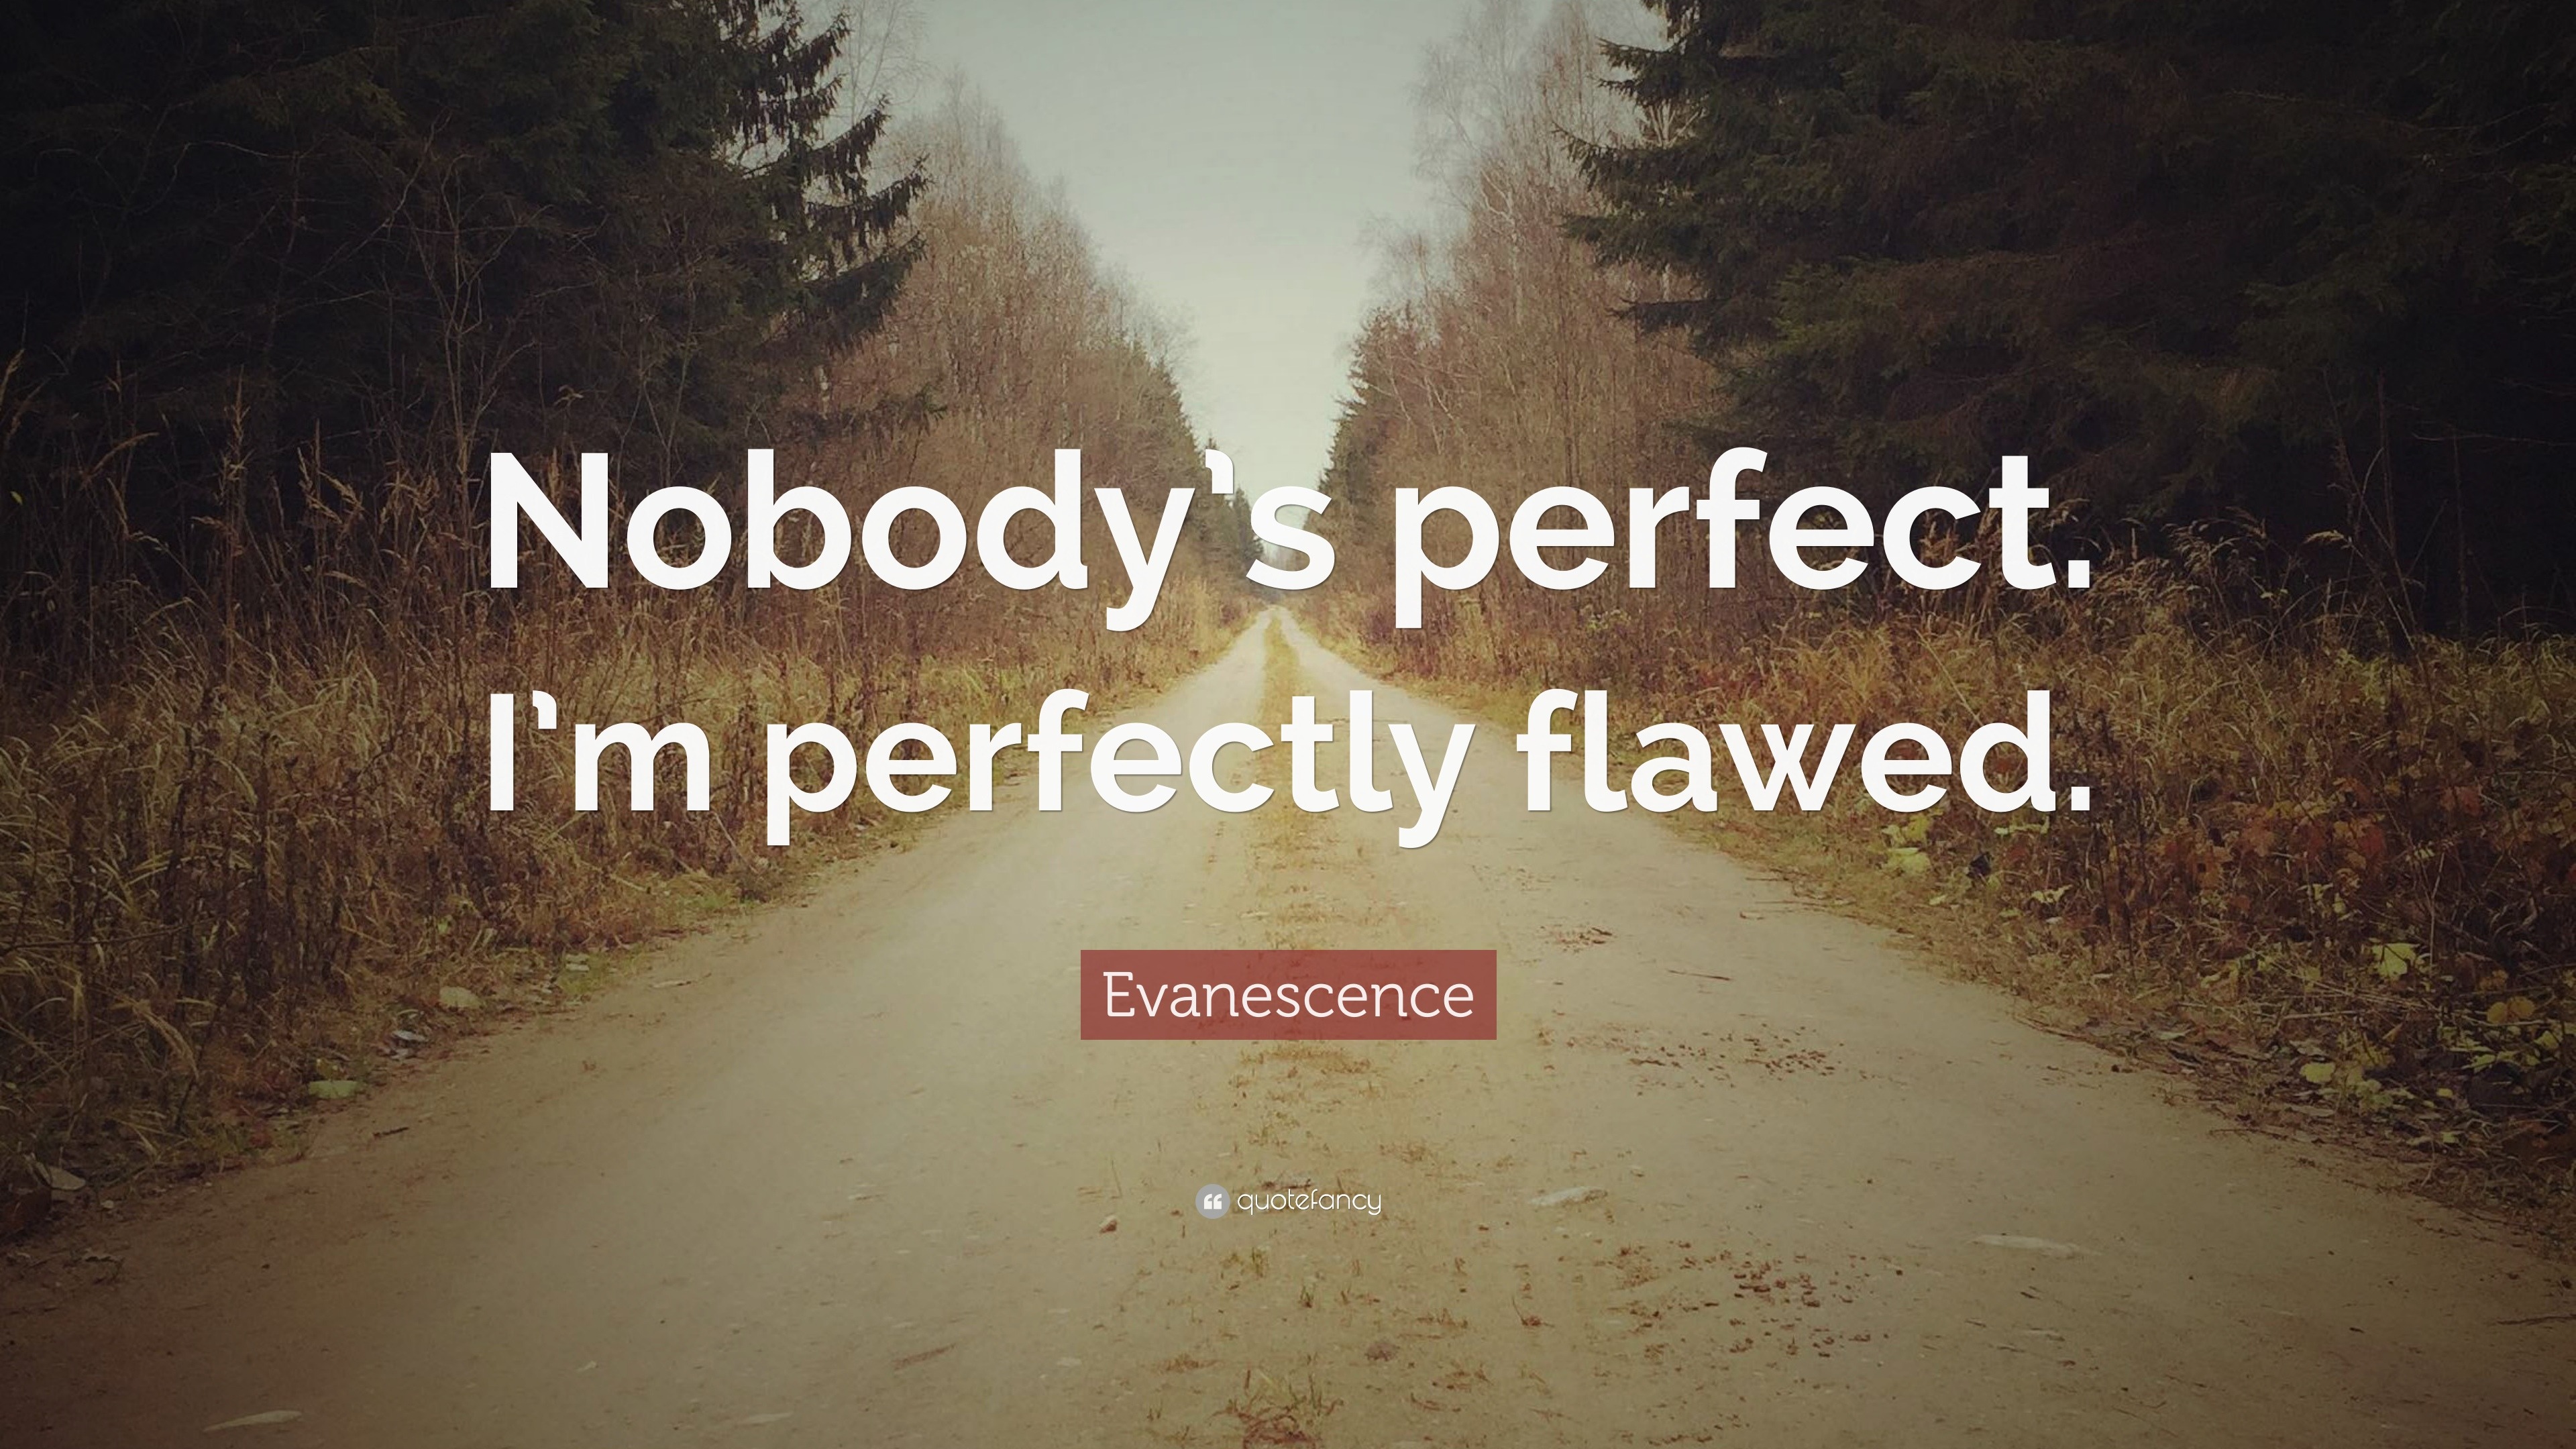 Nobodys Perfect Quote Evanescence Quotes 9 Wallpapers Quotefancy See More Ideas About